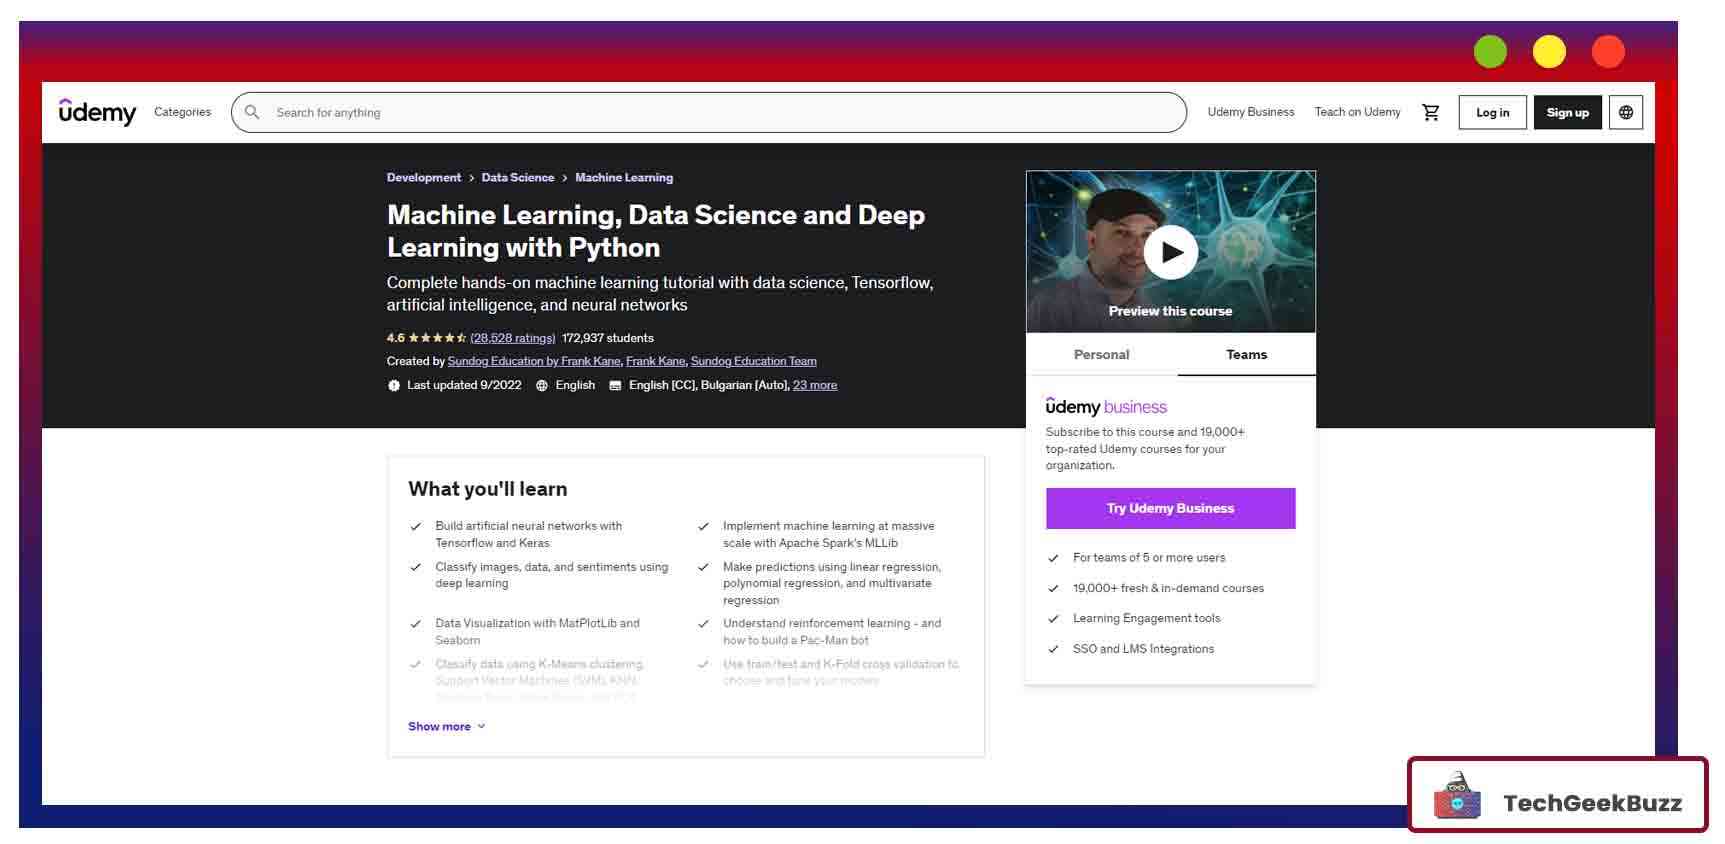 Machine Learning, Data Science and Deep Learning With Python